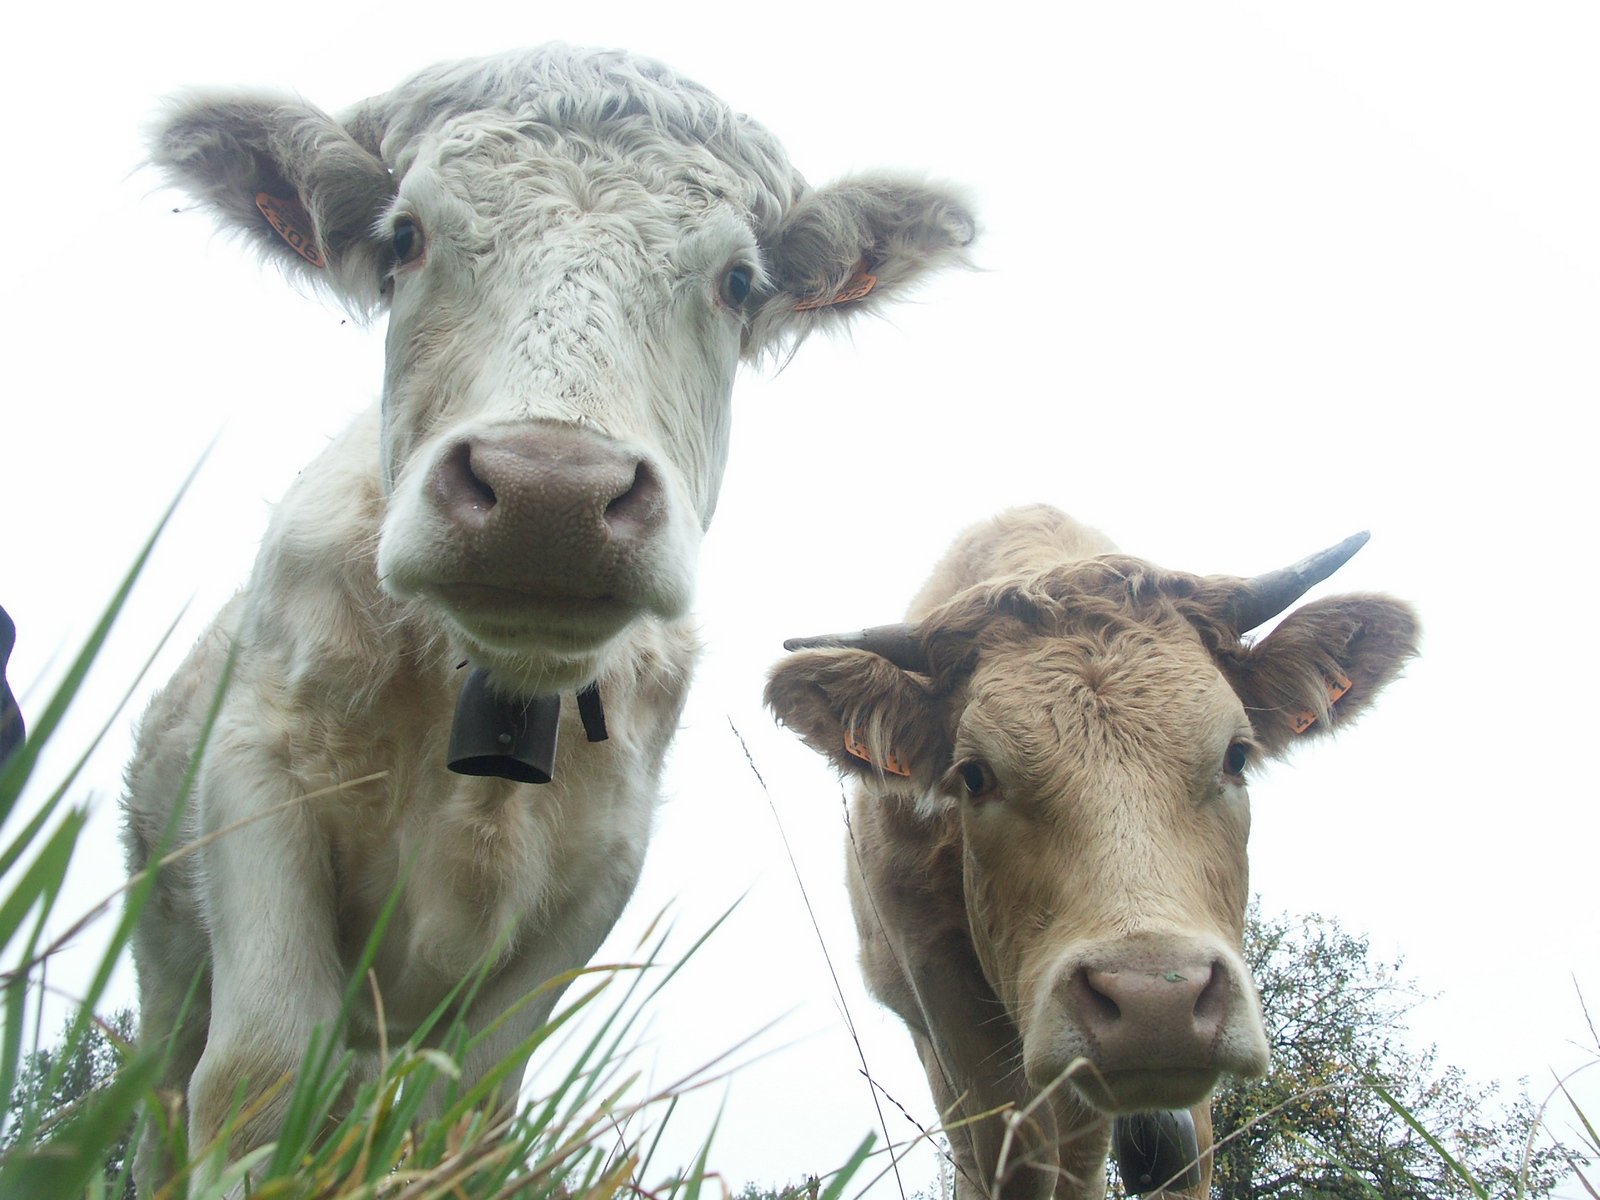 two brown and white cows staring directly at the camera